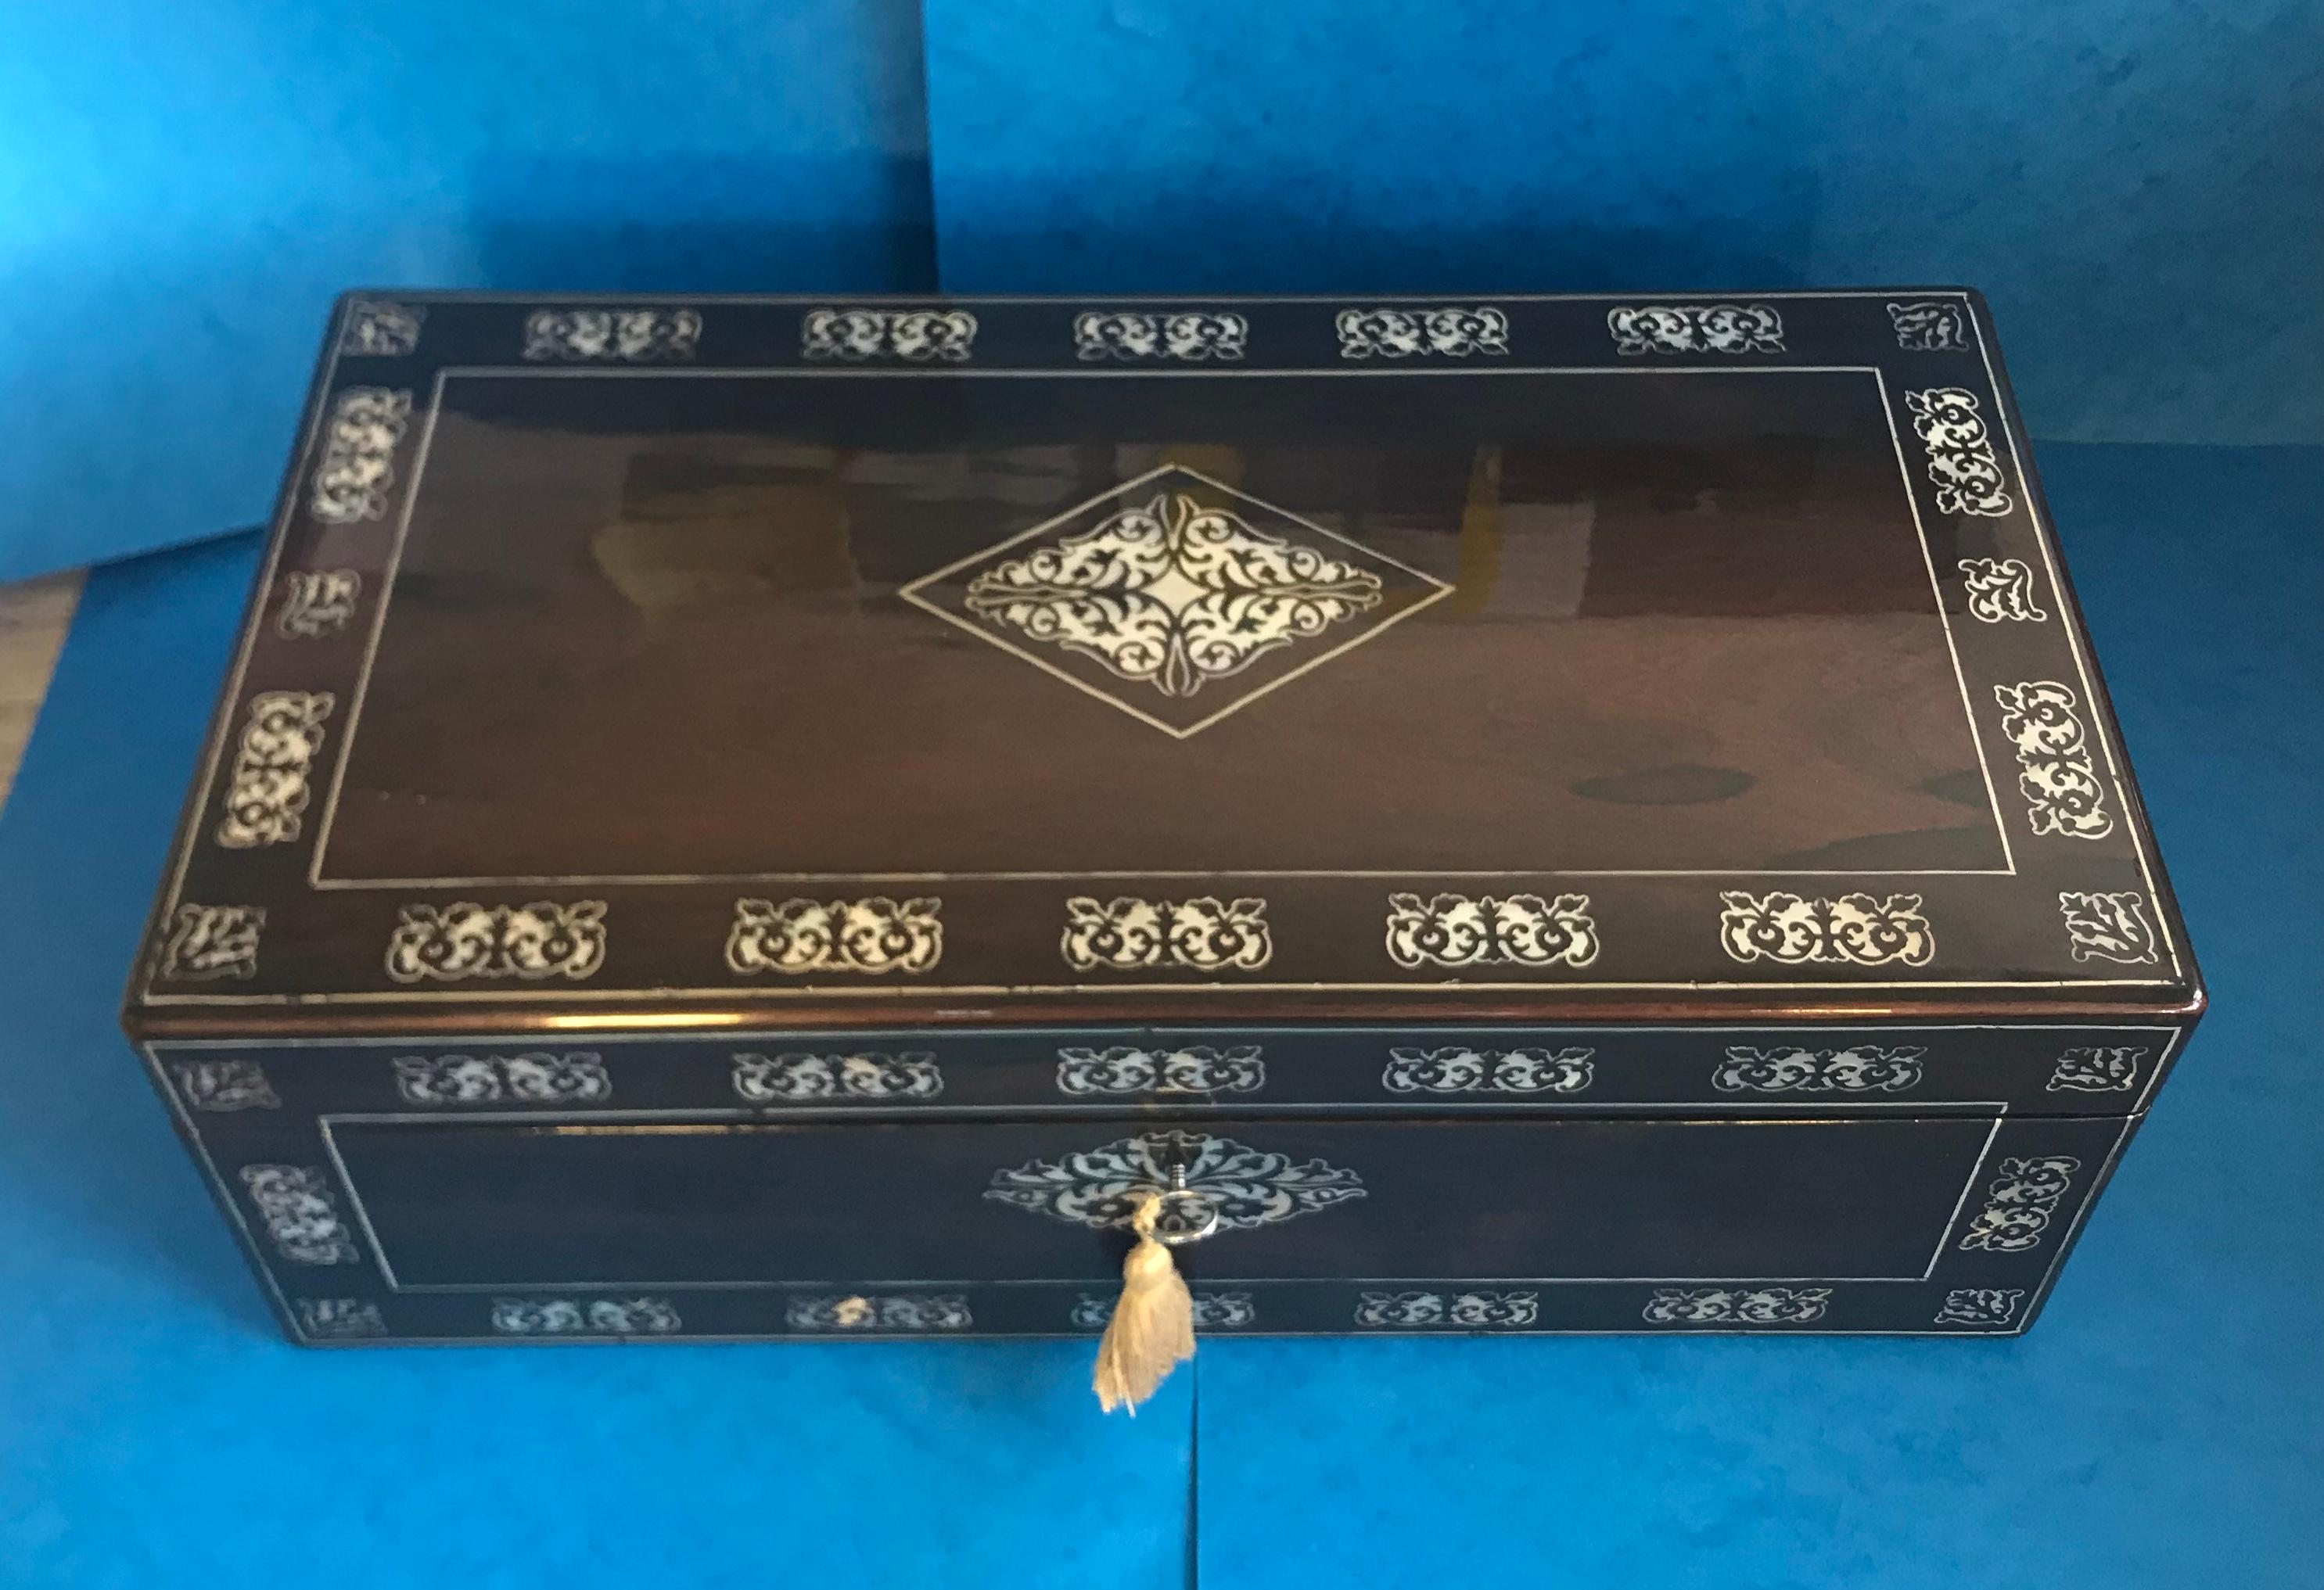 William IV rosewood writing slope.
A stunning wringing slope that dates back to circa 1830, it’s beautifully inlaid with a pewter and mother of pearl pattern. The writing slope has a fully working lock and tasseled key. It has military handles to